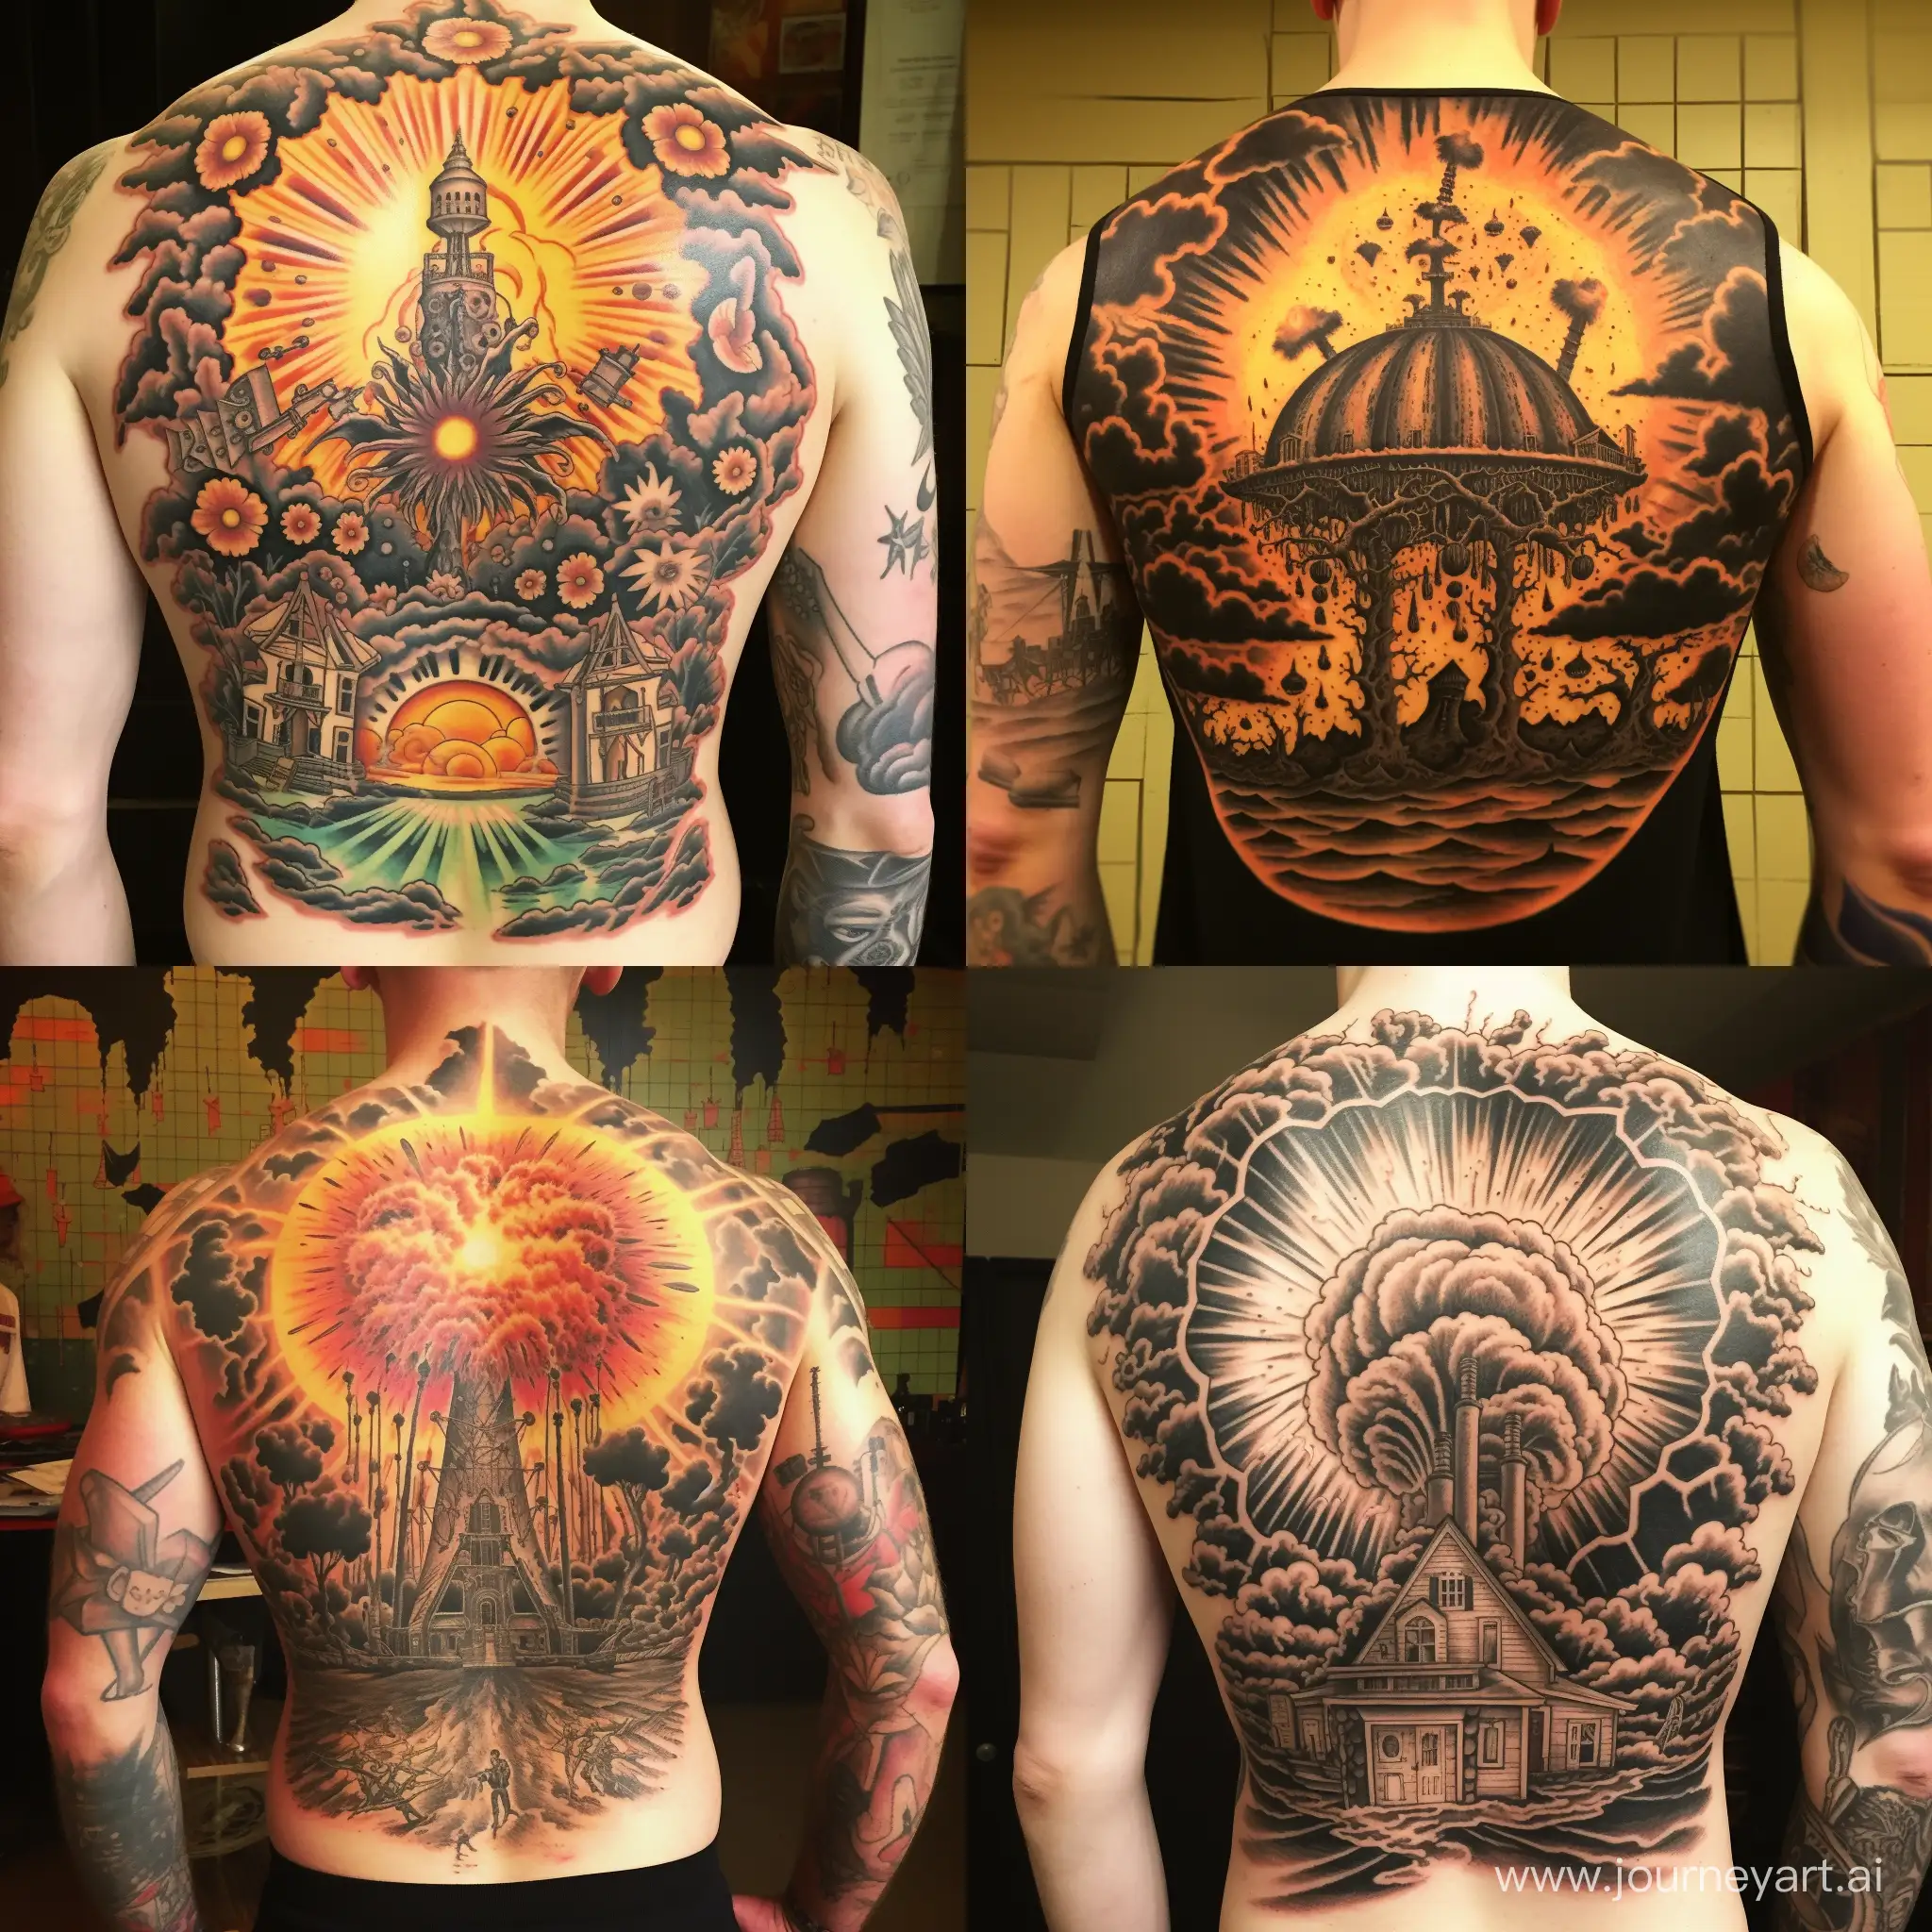 Massive nuclear explosion, obliterating colony, 1940s early American traditional tattoo